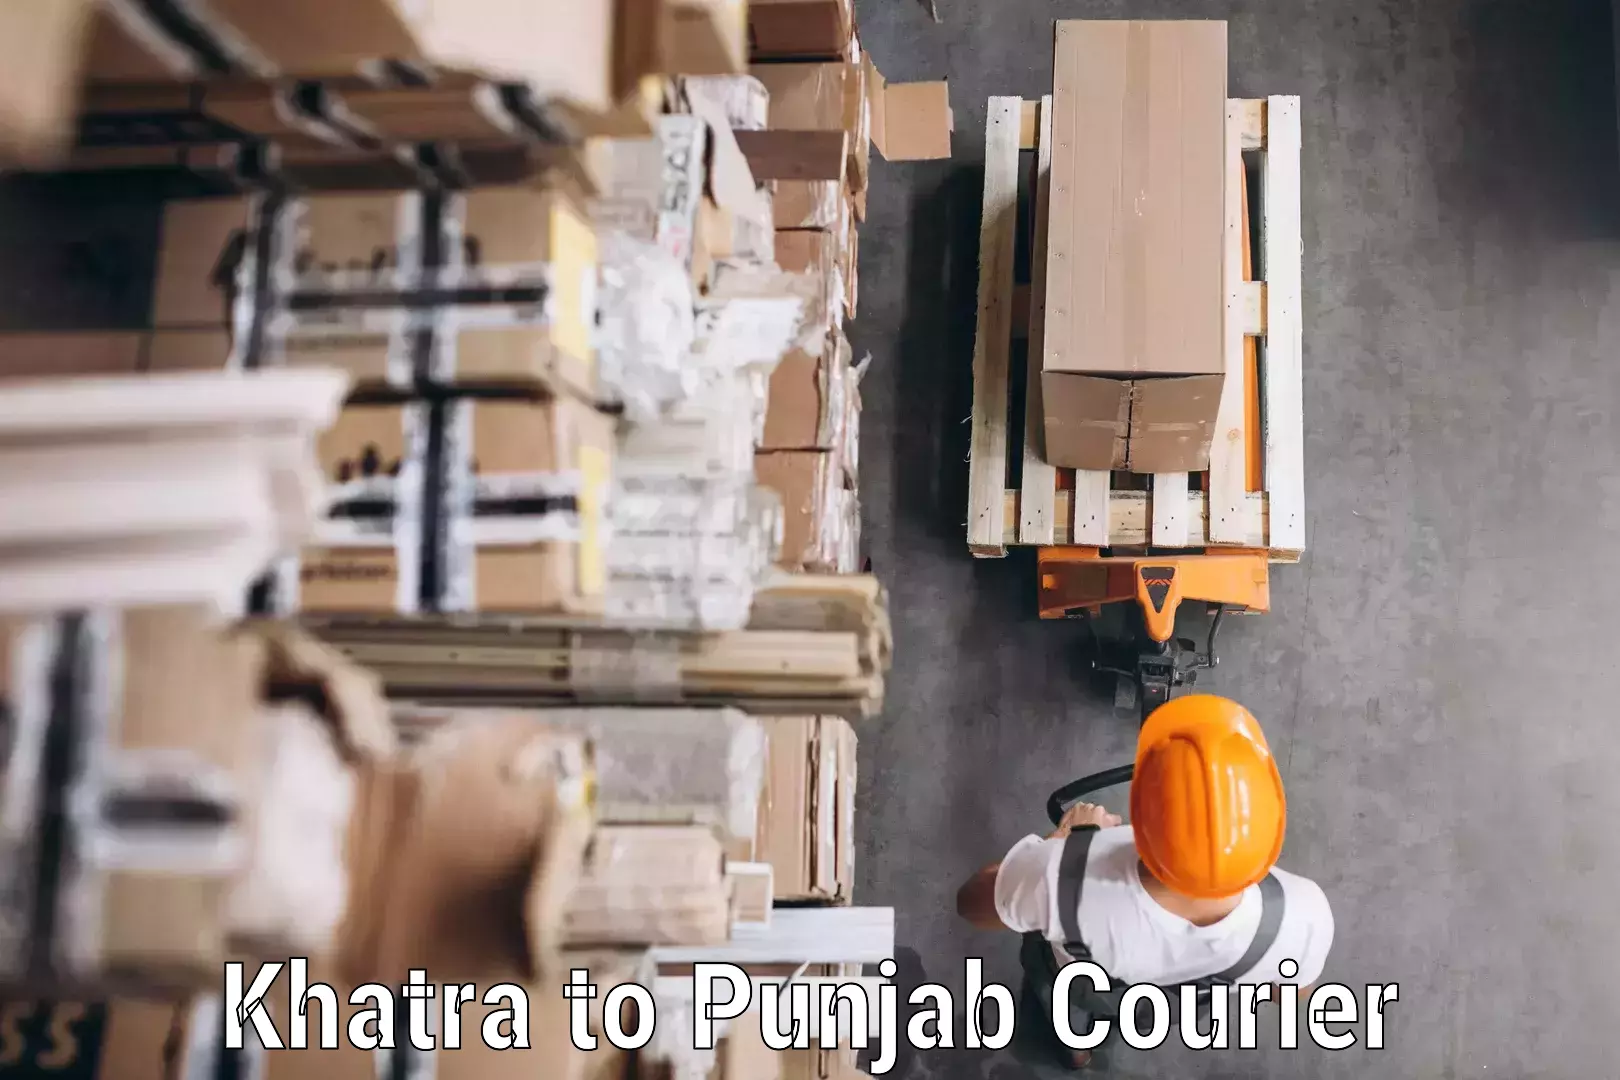 Personal parcel delivery Khatra to Mohali